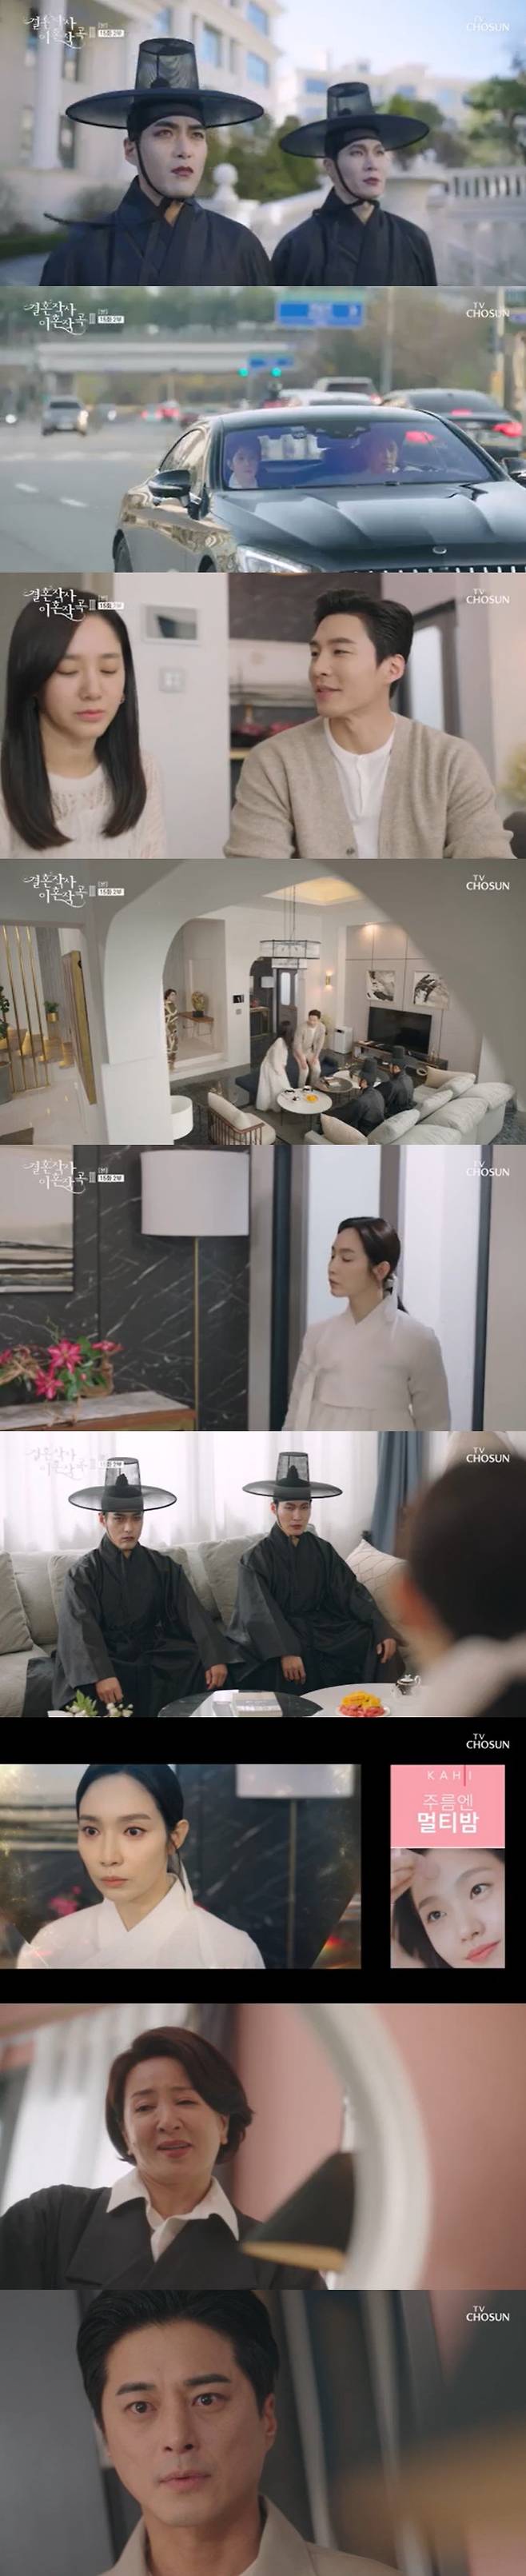 Seoul = = Two Those Merry Souls visited the SF group in Marriage Writer Divorce Composition 3.In TV Chosun (CHOSUN)s Divorce Composition 3 of Marriage Writers (playplayplay Im Sung-han, director Park Chae-won, and Baek Ji-su), which was broadcast on the afternoon of the 30th, two Those Merry Souls were shown looking for the home of the SF Group chairman.On this day, the western half (Moon Sung-ho) confessed that he had dreamed of a worm at the golf course.After hearing this, the SF Group Chairman Seo (Han Jin-hee) told Seo Dong-ma that he had a hole-in-one at the golf course the day before, and thought that the dream was Tae-mong and told Seo Dong-ma, Go to the dream.In the end, Seo Dong-ma bought the dream of the West for 100,000 won.Chairman Seo horribly cared for Safi-young (Park Joo-mi), who was recently pregnant.When he wanted strawberries during his meal, he called a helper working in the kitchen and immediately bought strawberries.Seo called Safi Young separately and said, The dream is Taemong.Ishieun (Jeon Soo-kyung) felt sad when Safiyoung took over his father-in-laws love, but the western side took care of him, saying, I will do better.Song Won (Lee Min-young), who was a married man and was floating in Gucheon, followed the western half to the SF group house.In front of SF group DANCING SANMA PALACE, two Those Merry Souls were staring at the house.Songwon followed the western half into the SF Group house, where two Those Merry Souls were looking at Safiyoung and Seo Dong-ma in the living room.Song Won was surprised to see this, and he was curious about who the next time was to take the character Those Merry Souls.Marriage writer divorce composition 3 leaves the final meeting on May 1.